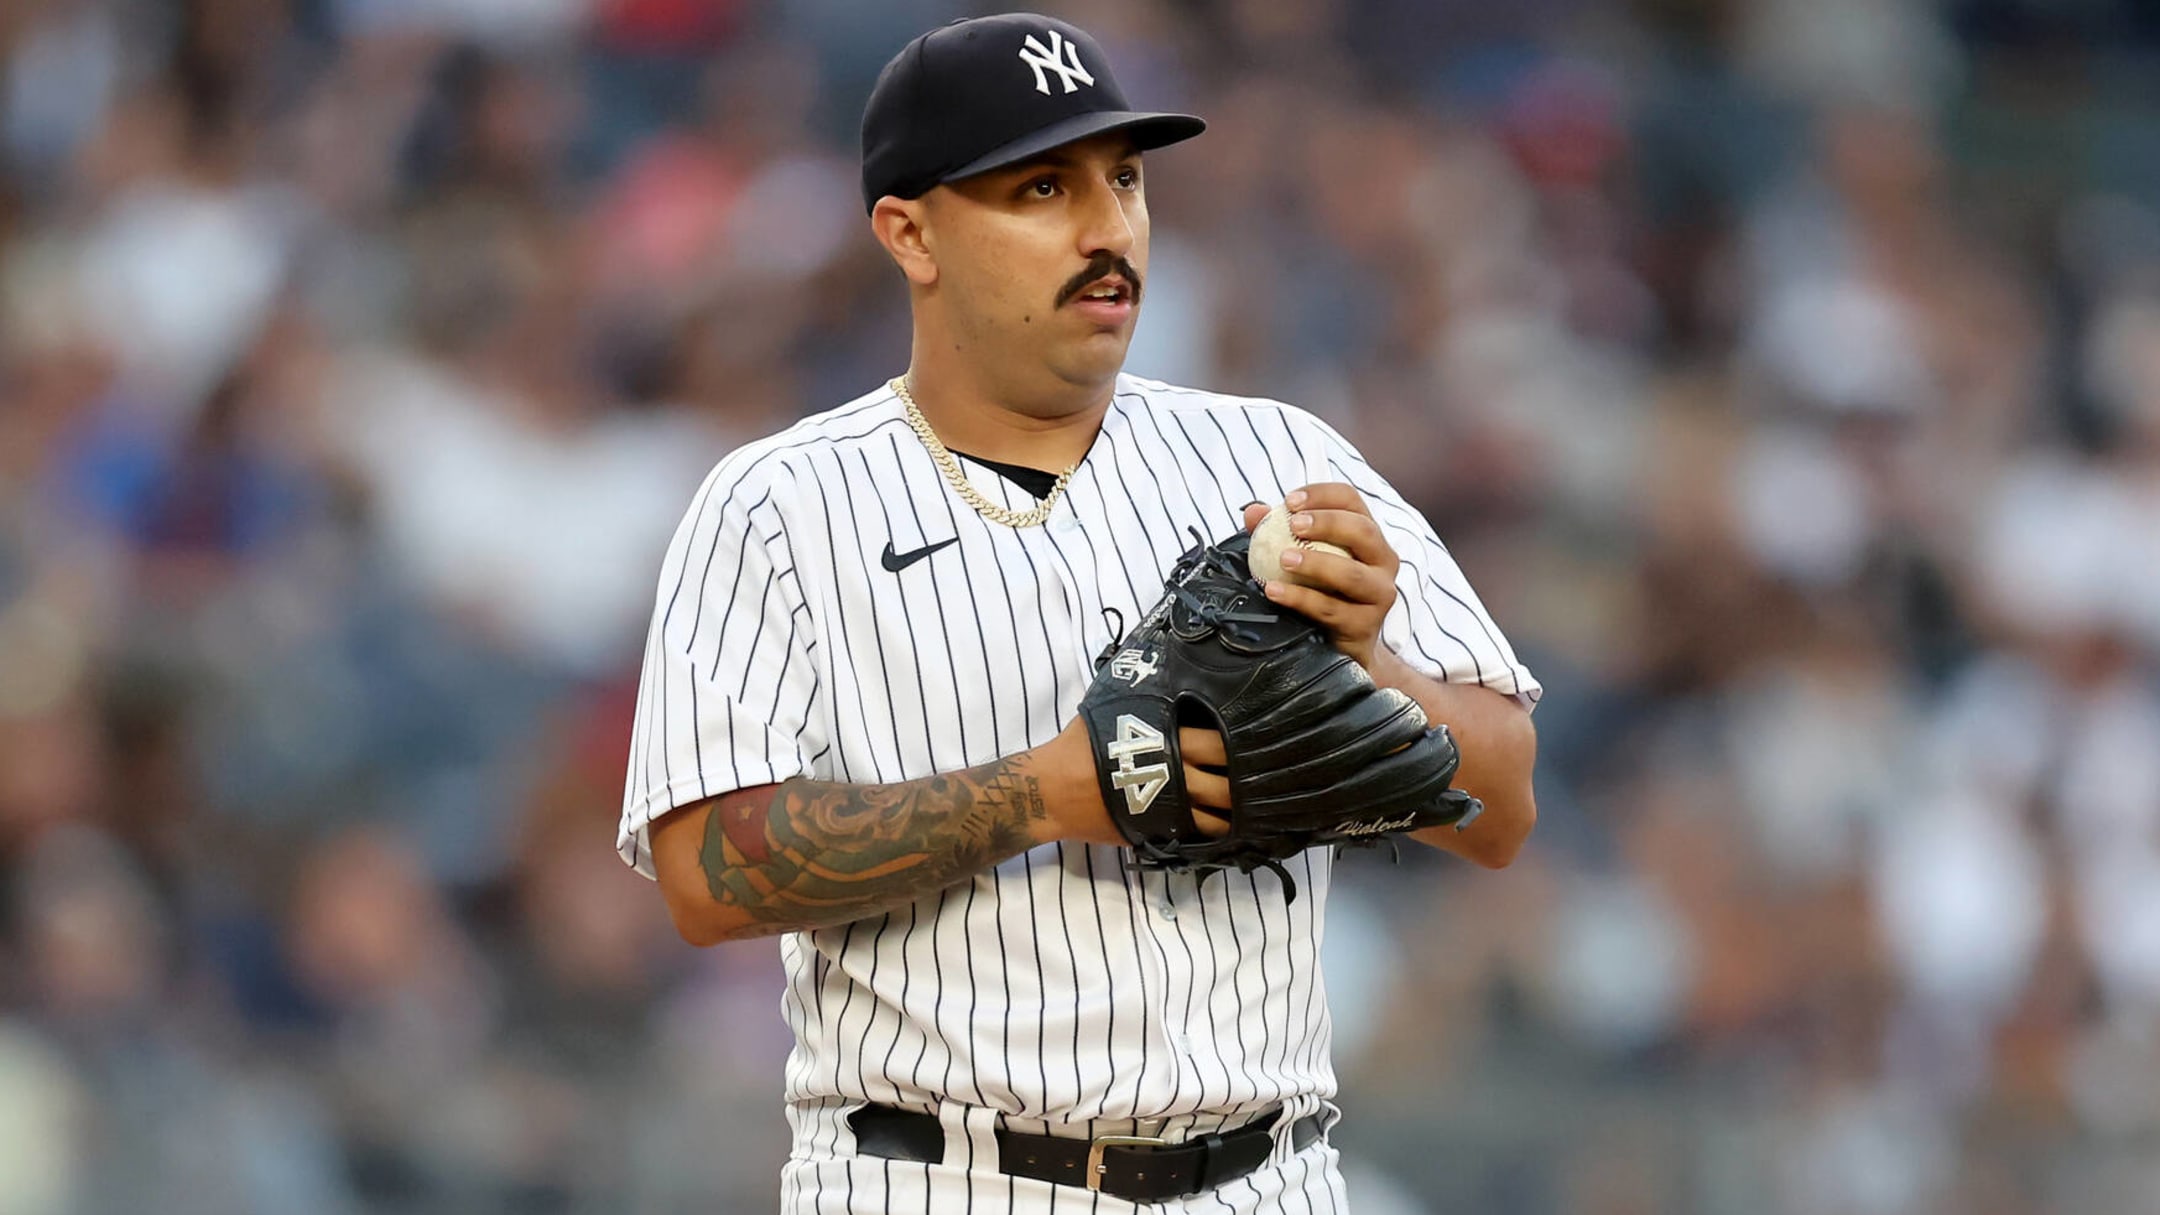 Yankees put All-Star Cortes on injured list for groin strain